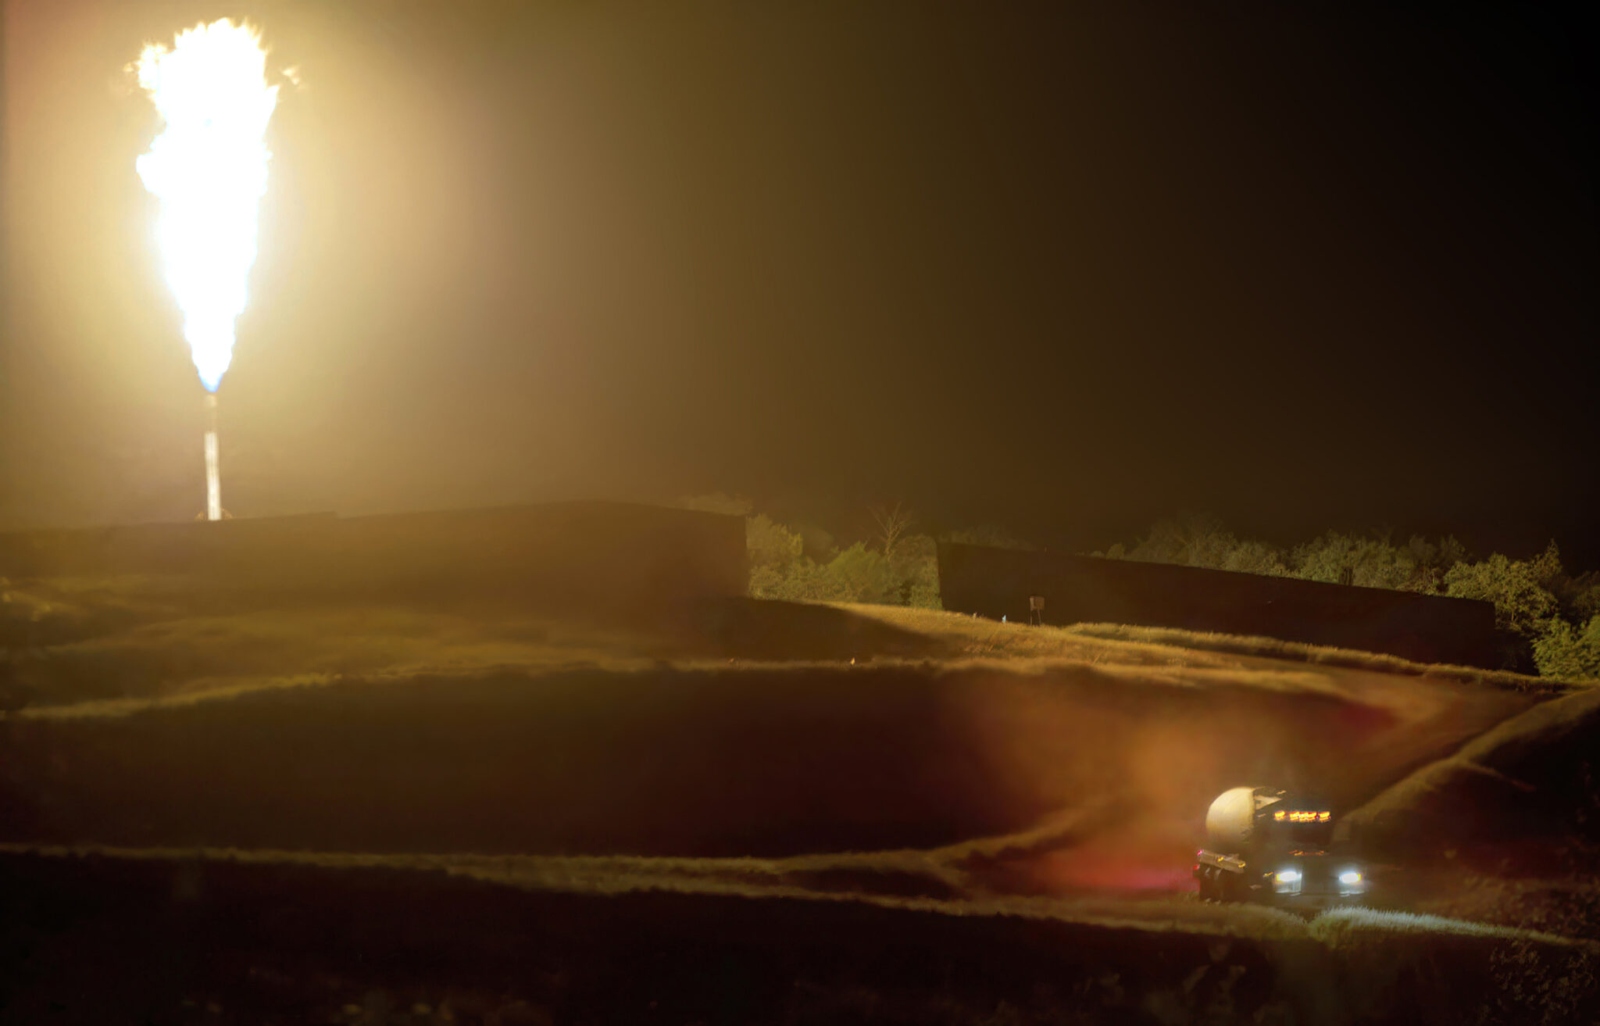 A nighttime scene of a truck and a column of fire.